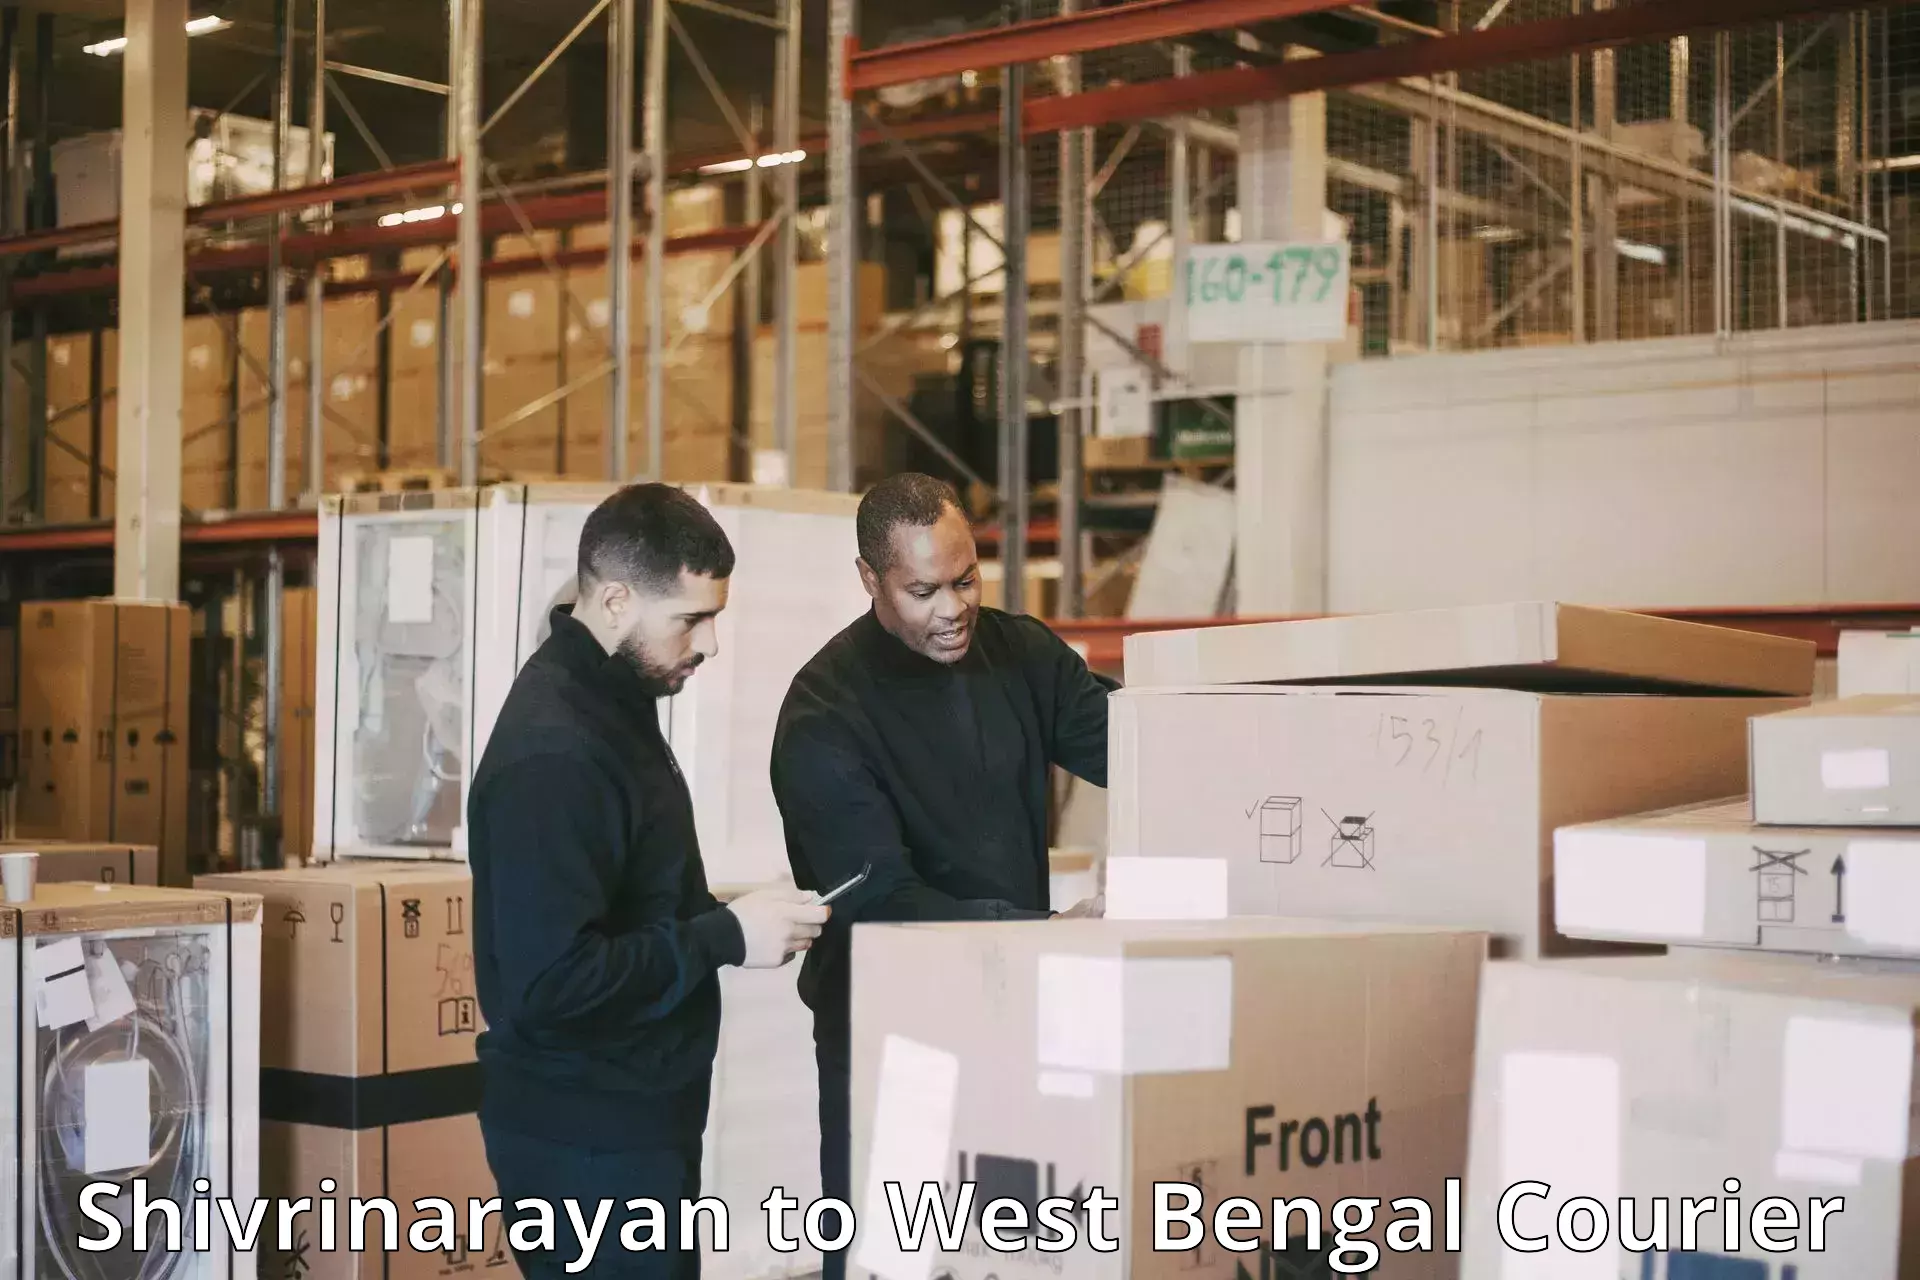 Courier service efficiency in Shivrinarayan to West Bengal